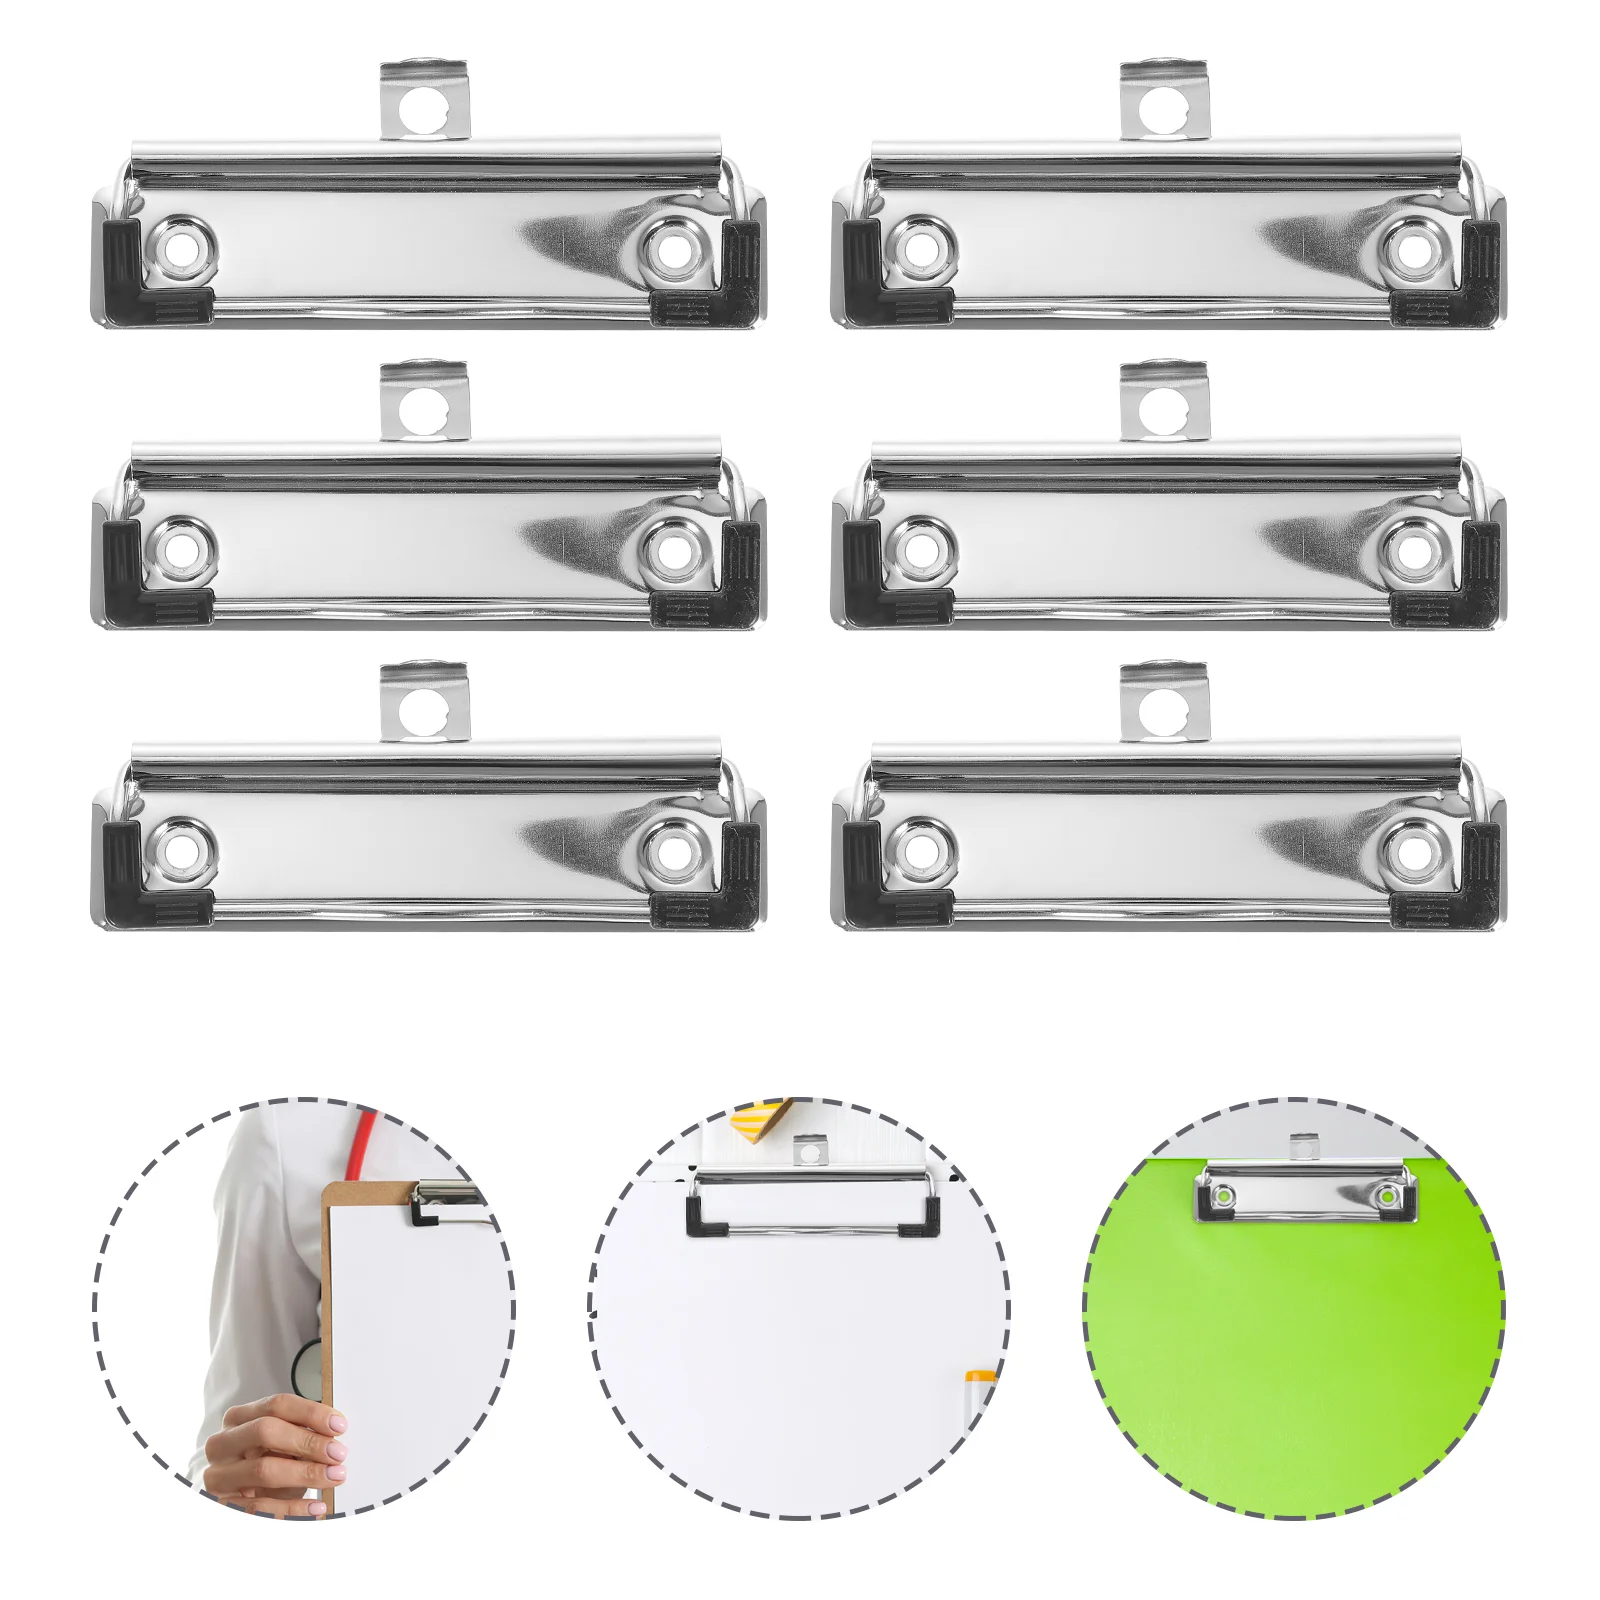 

Clips Clipboard Board Supplies File Office Document Loaded Binder Spring Mountable Metal Heavy Duty Clamps Clip Stationery Steel